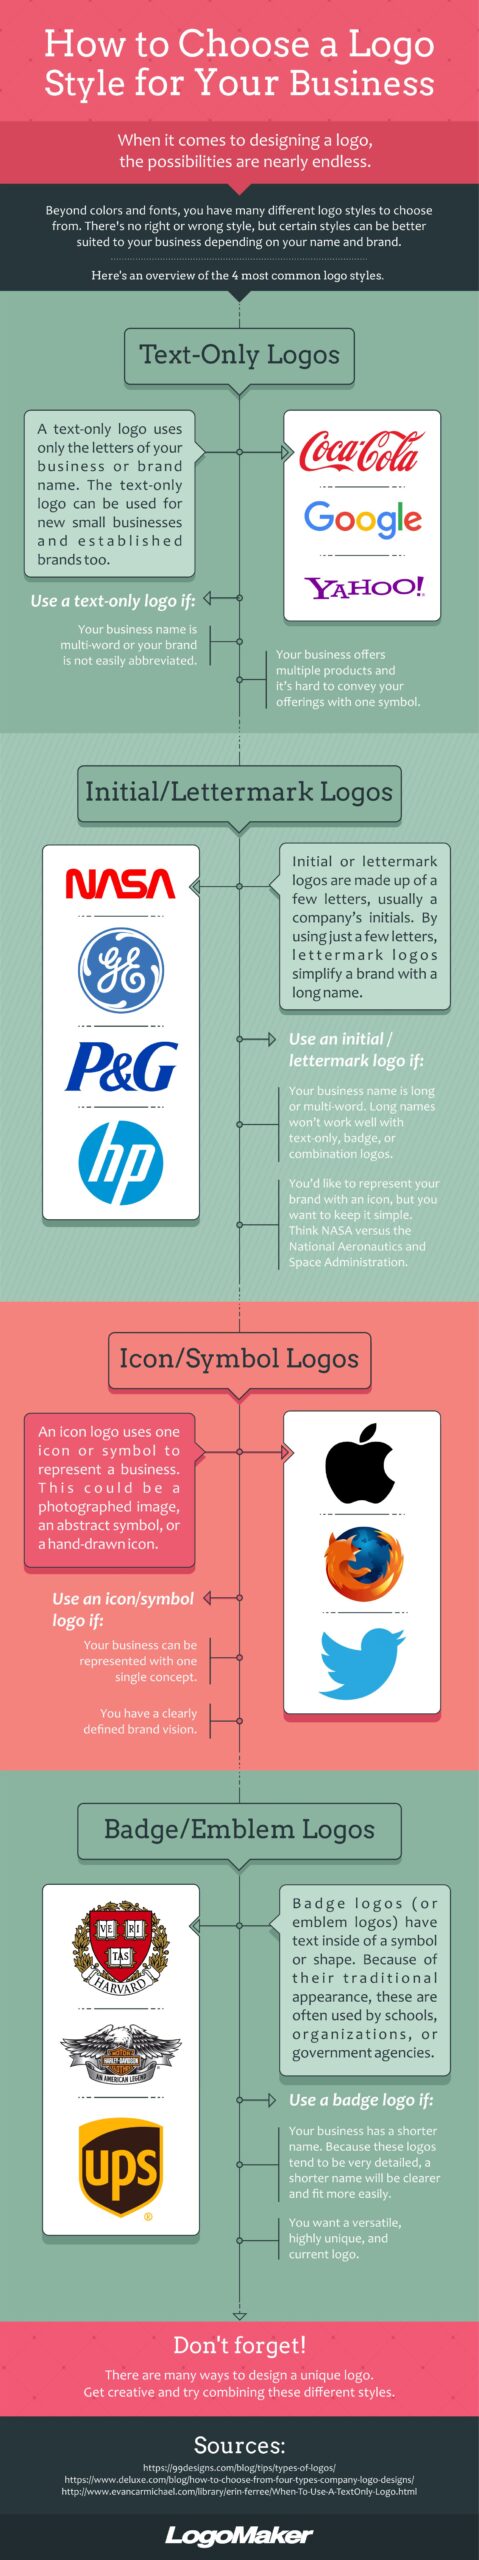 How-to-Choose-Logo-Style-IG